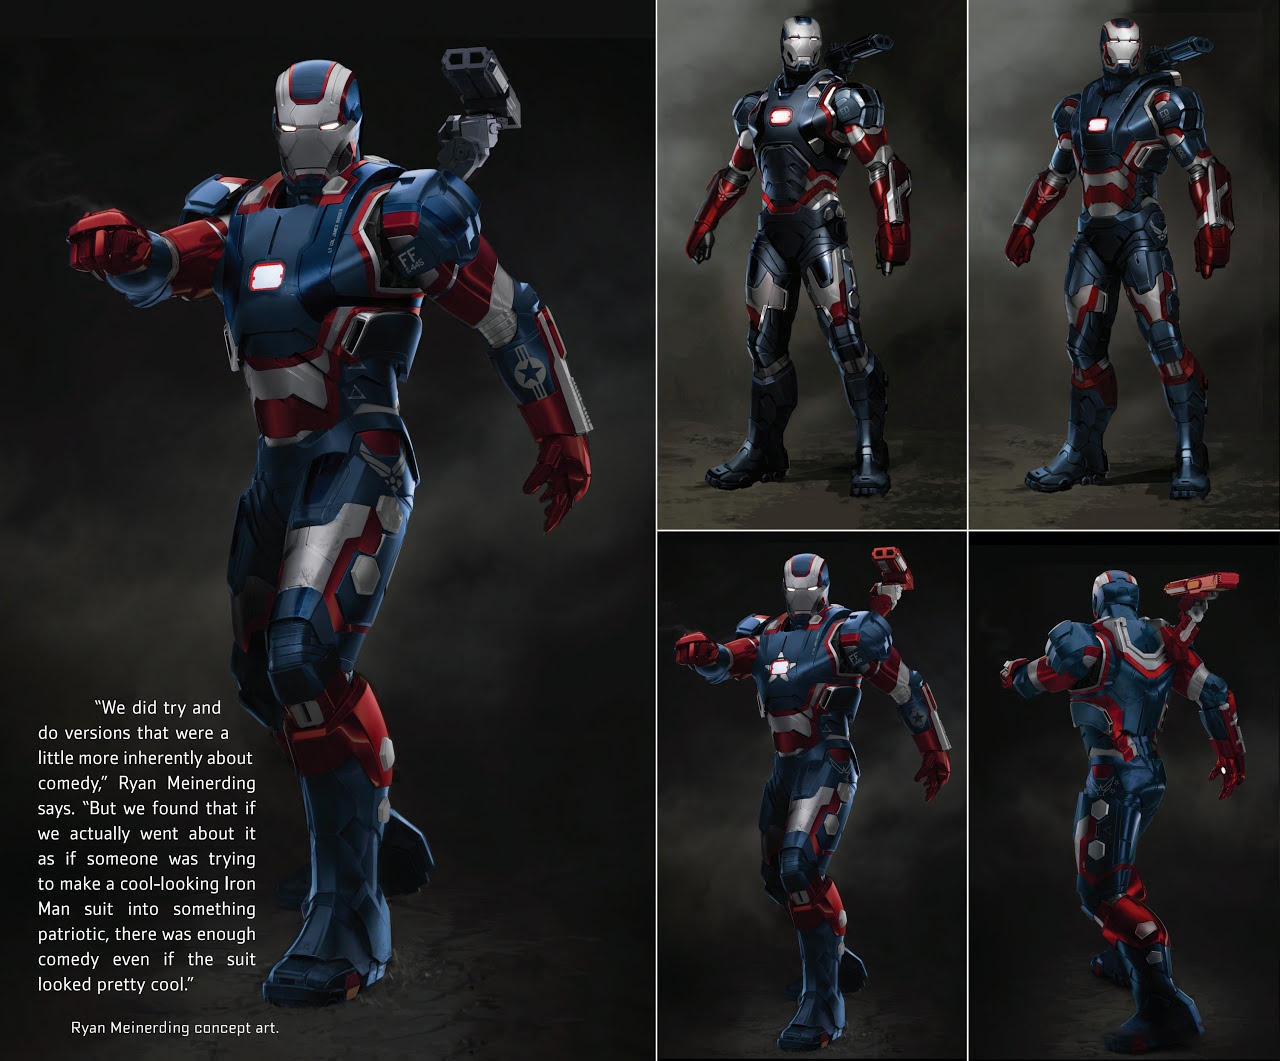 The Road to Marvel's Avengers Age of Ultron - The Art of the Marvel Cinematic Universe 216